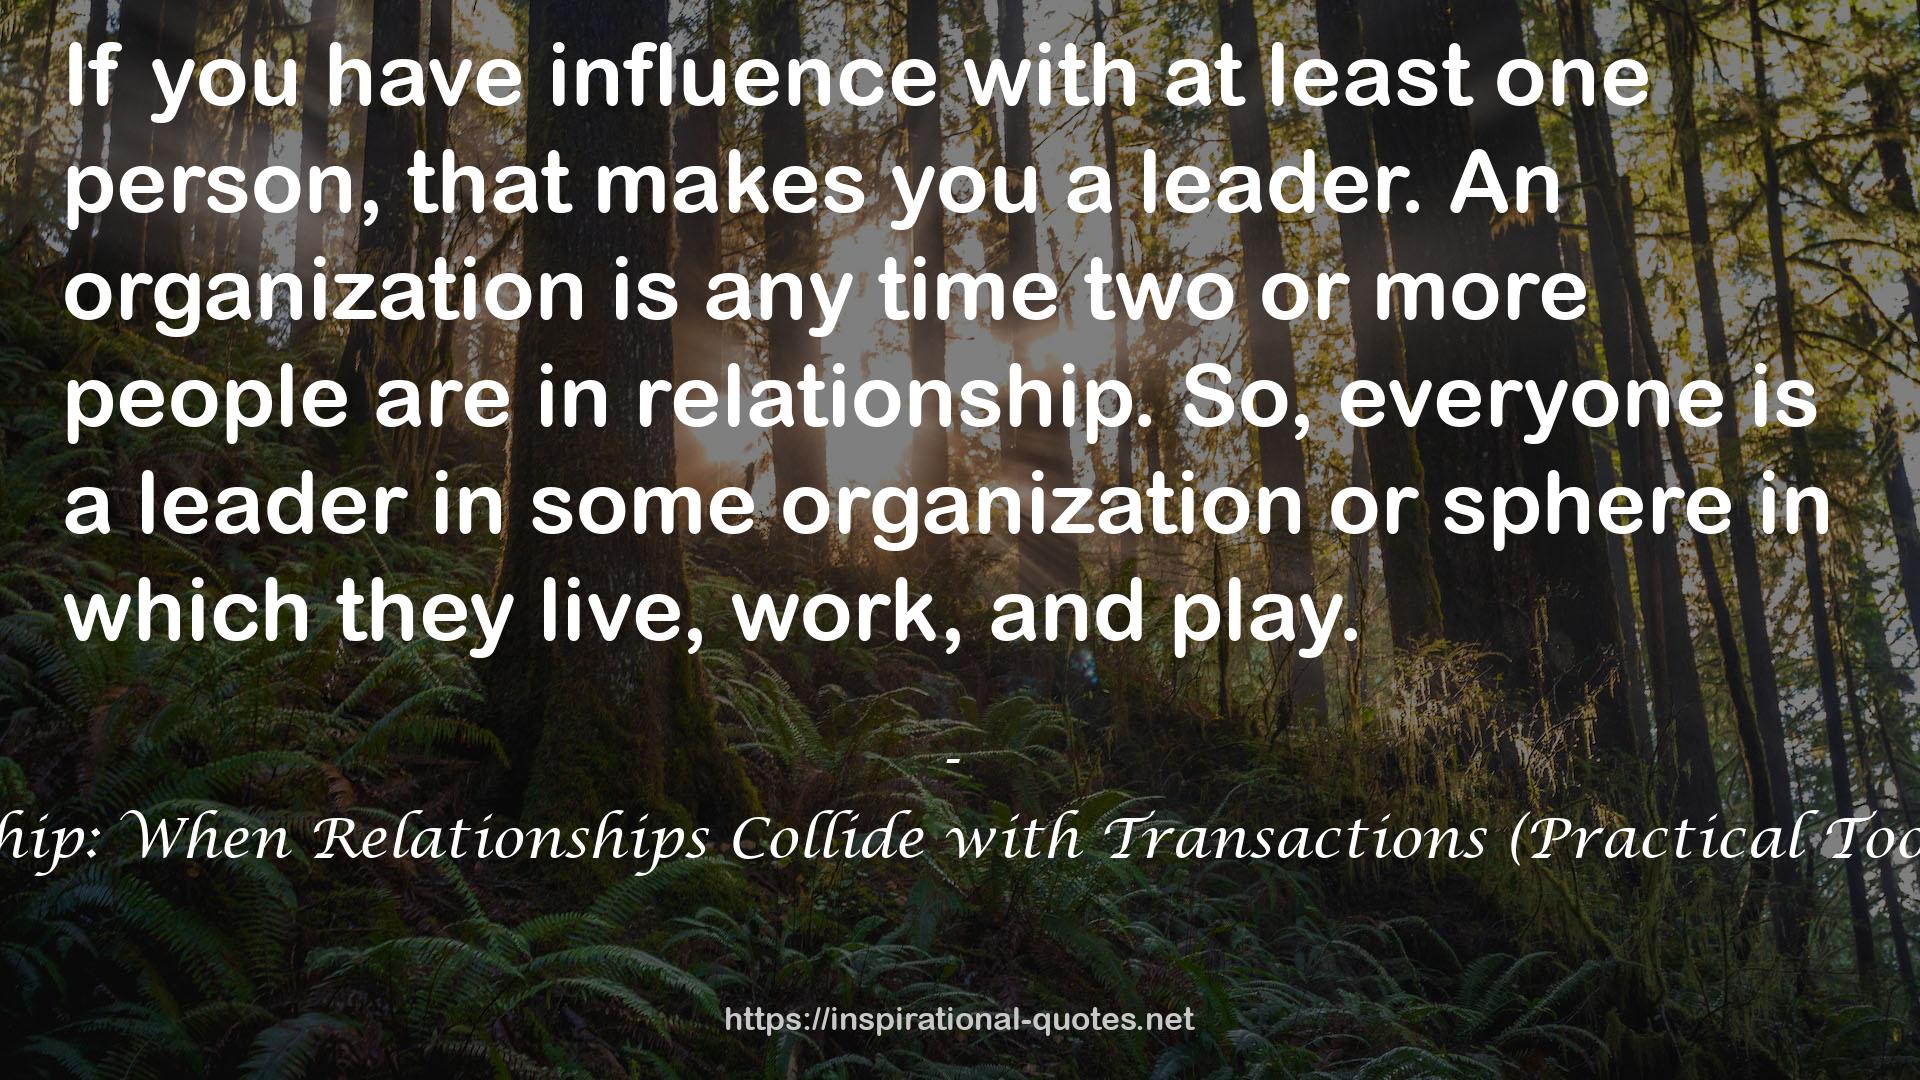 Relactional Leadership: When Relationships Collide with Transactions (Practical Tools for Every Leader) QUOTES